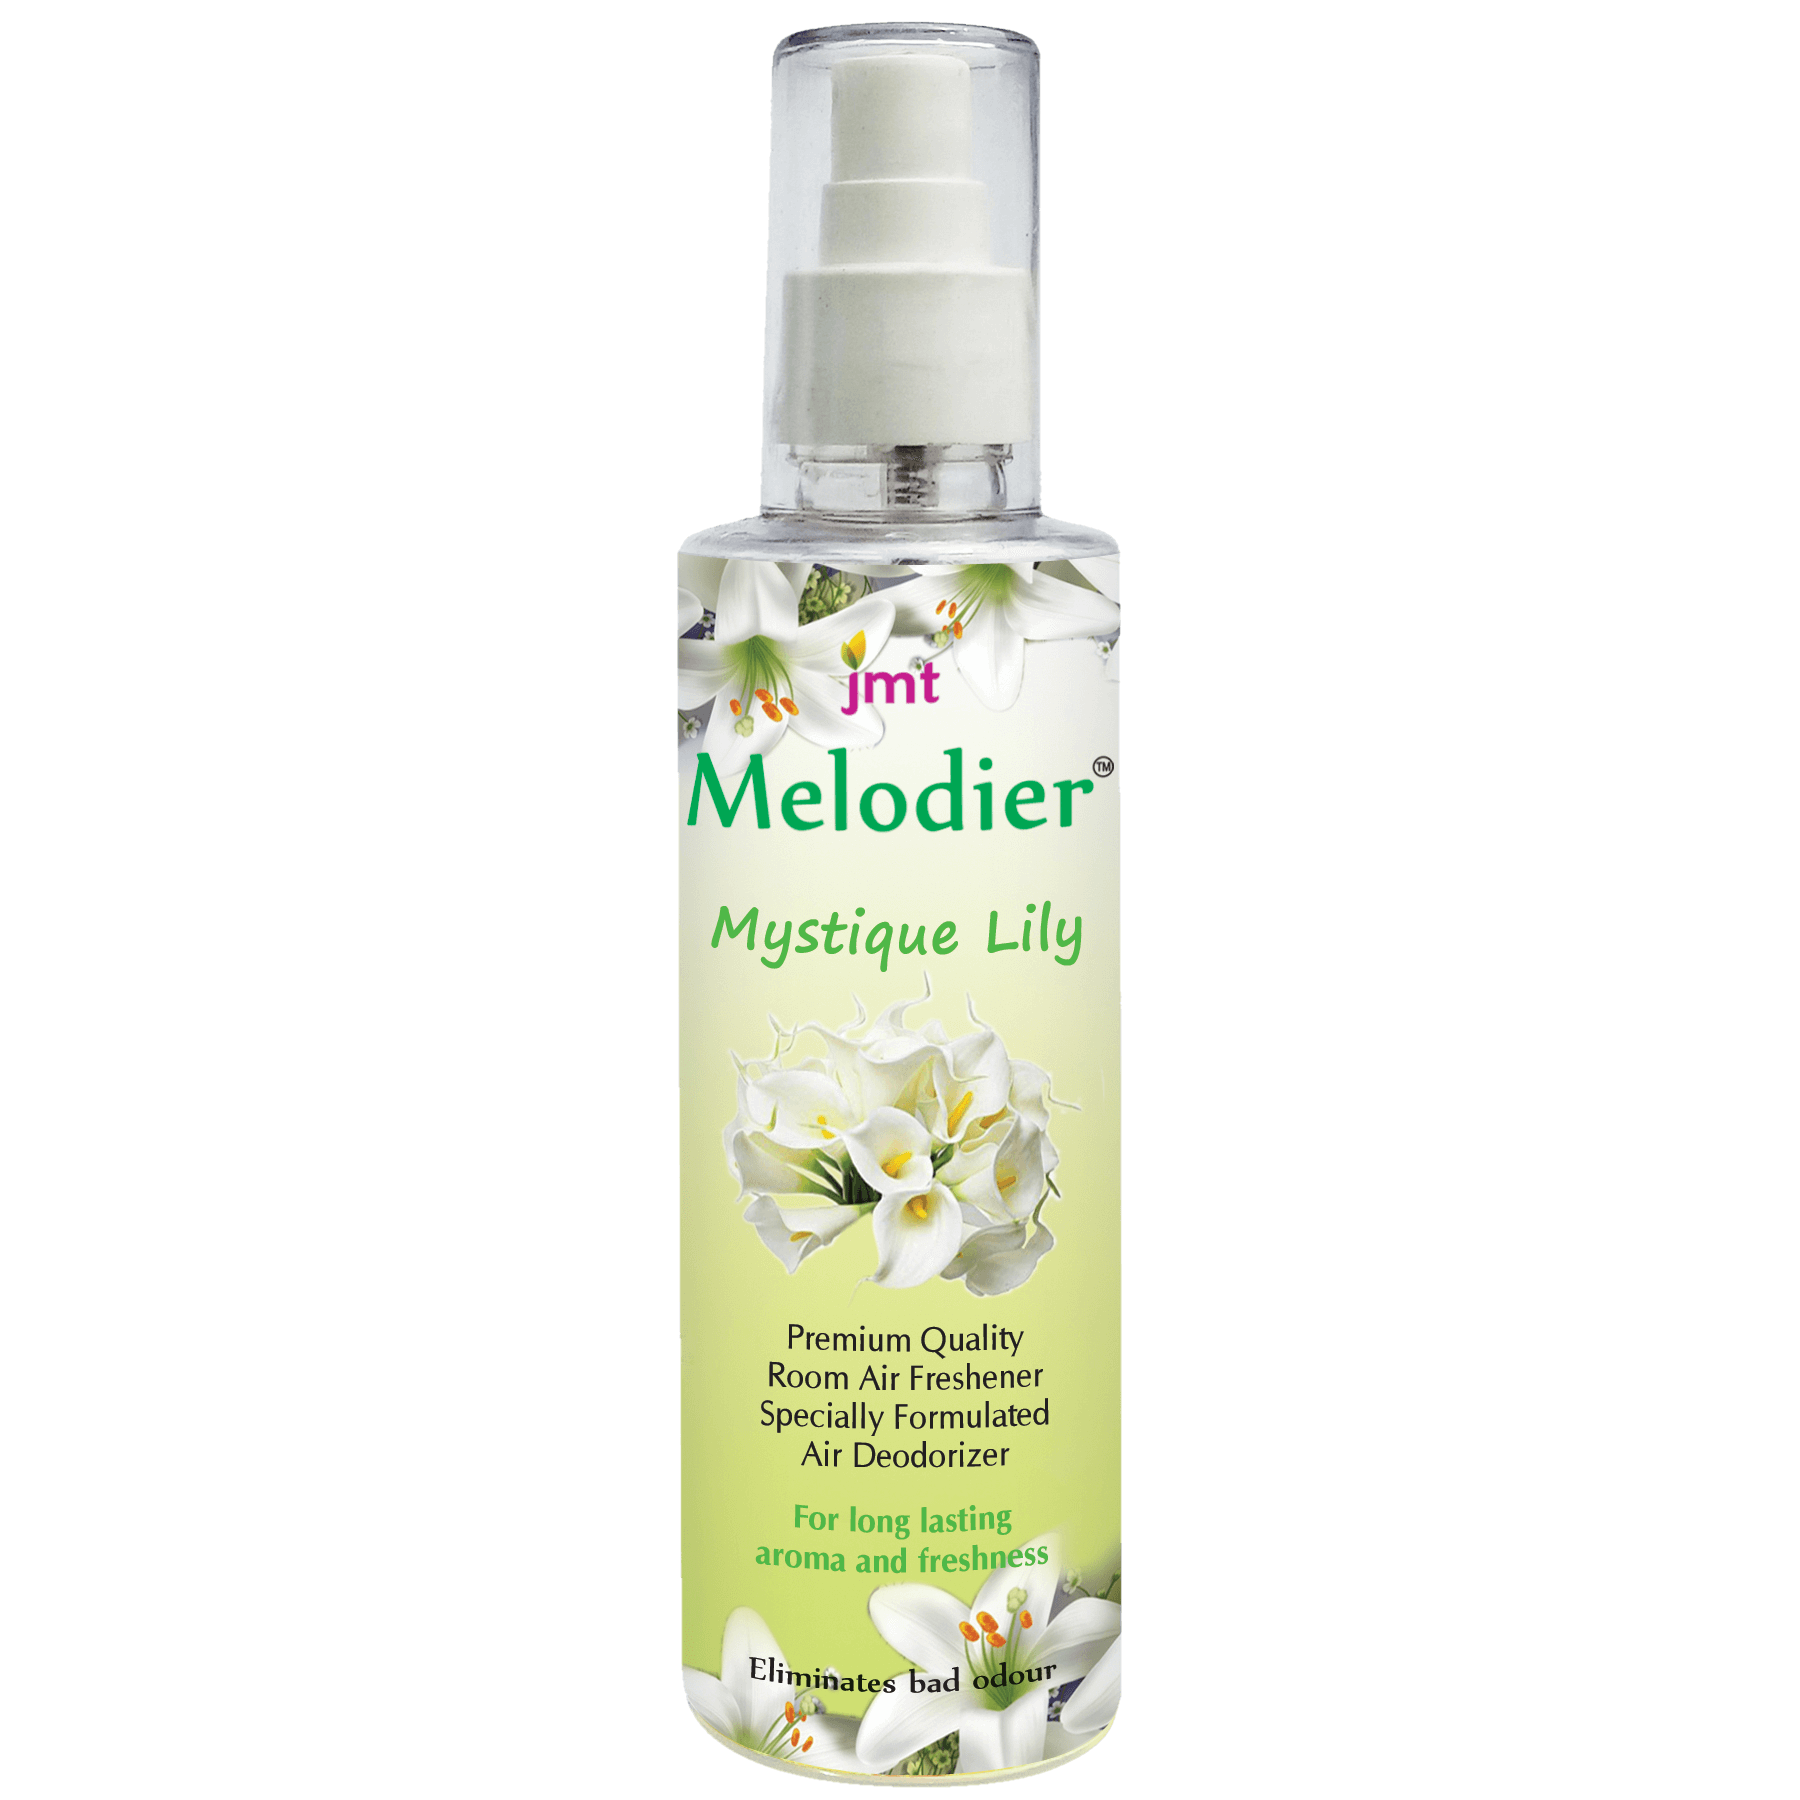 Buy Three, Get Four - Pack of 4 x 200ml Melodier Room Air Freshener and A True Deodorizer